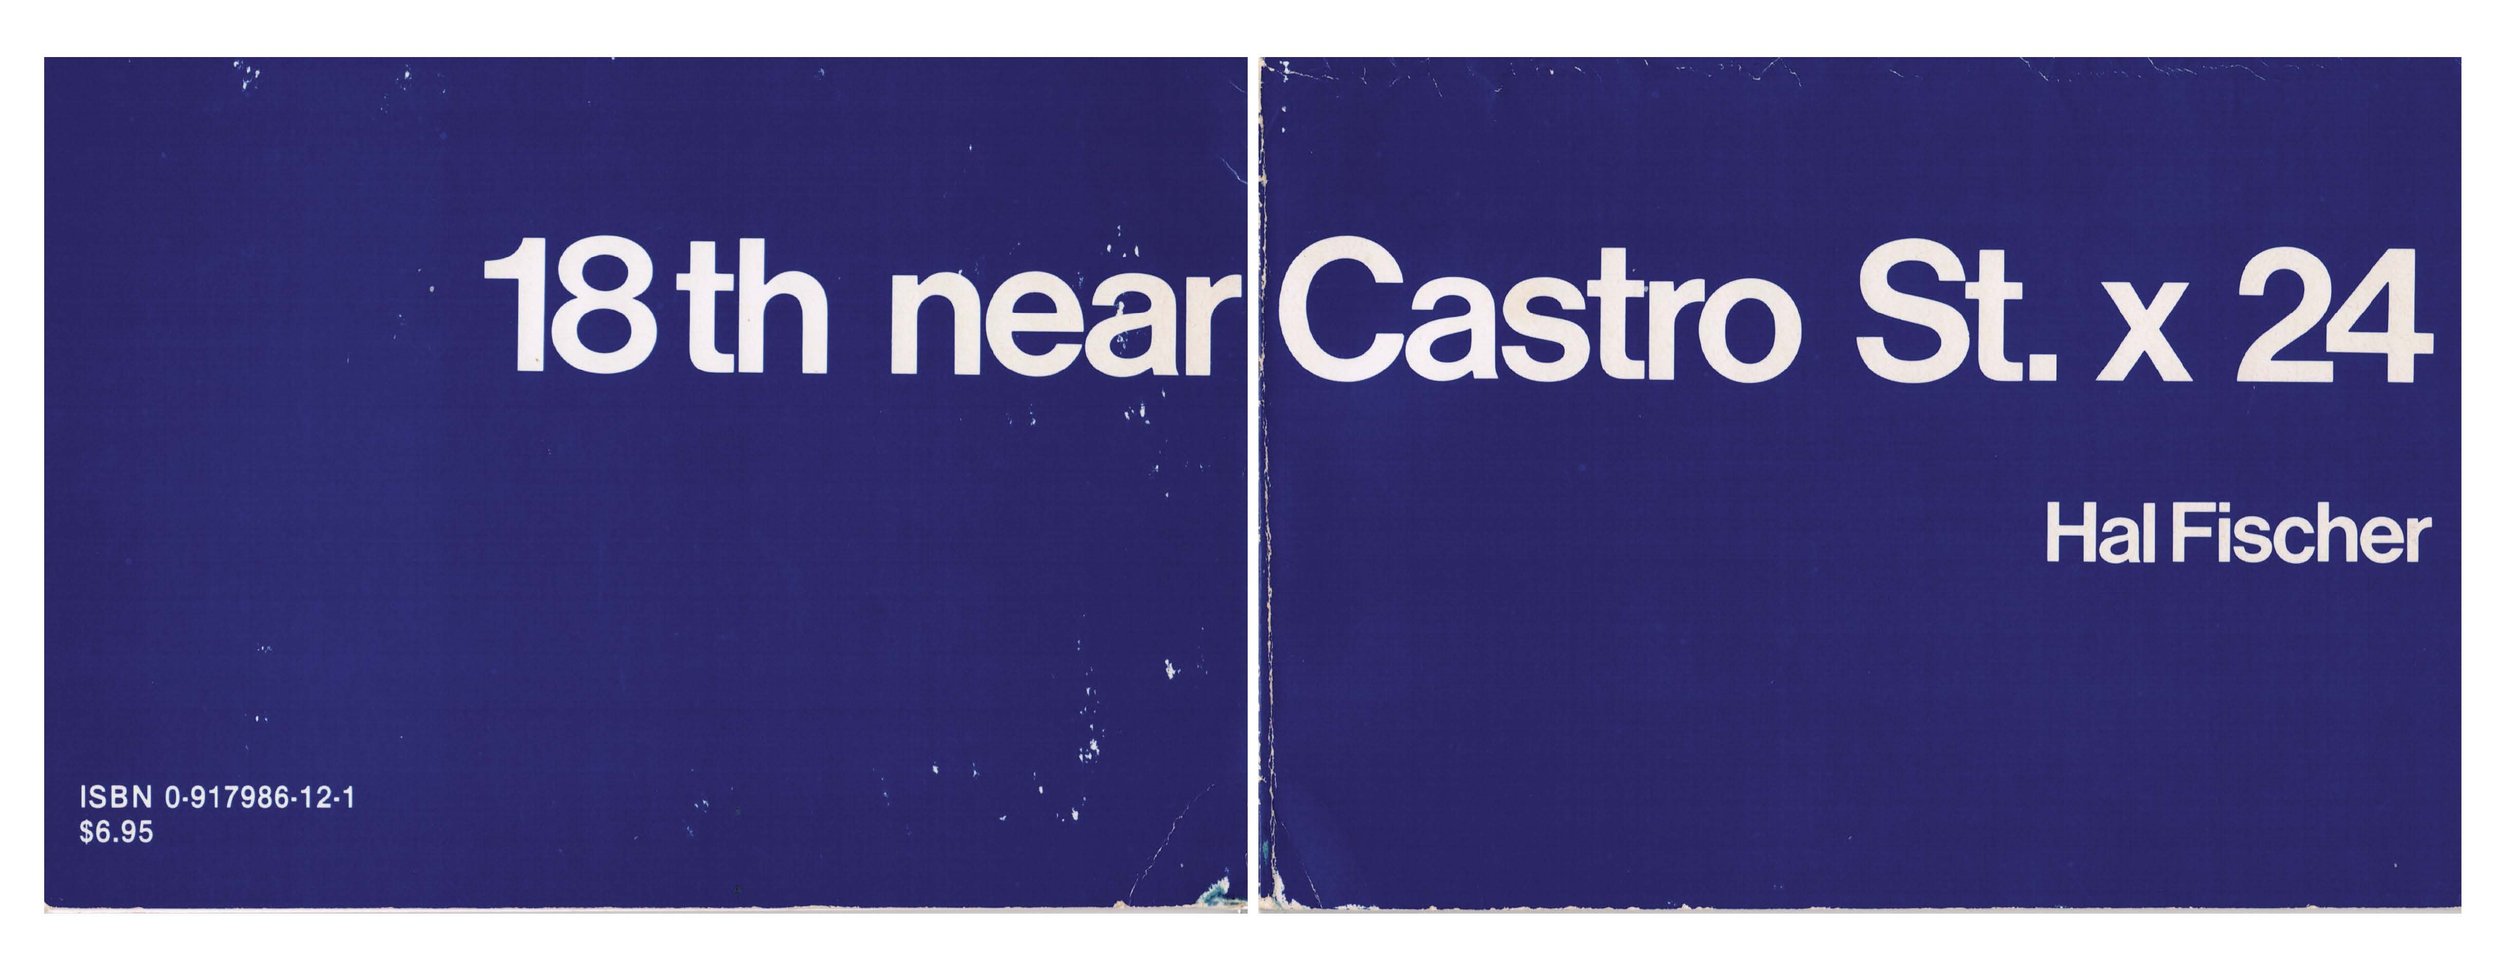 Castro Street Cover_Page_1.jpg